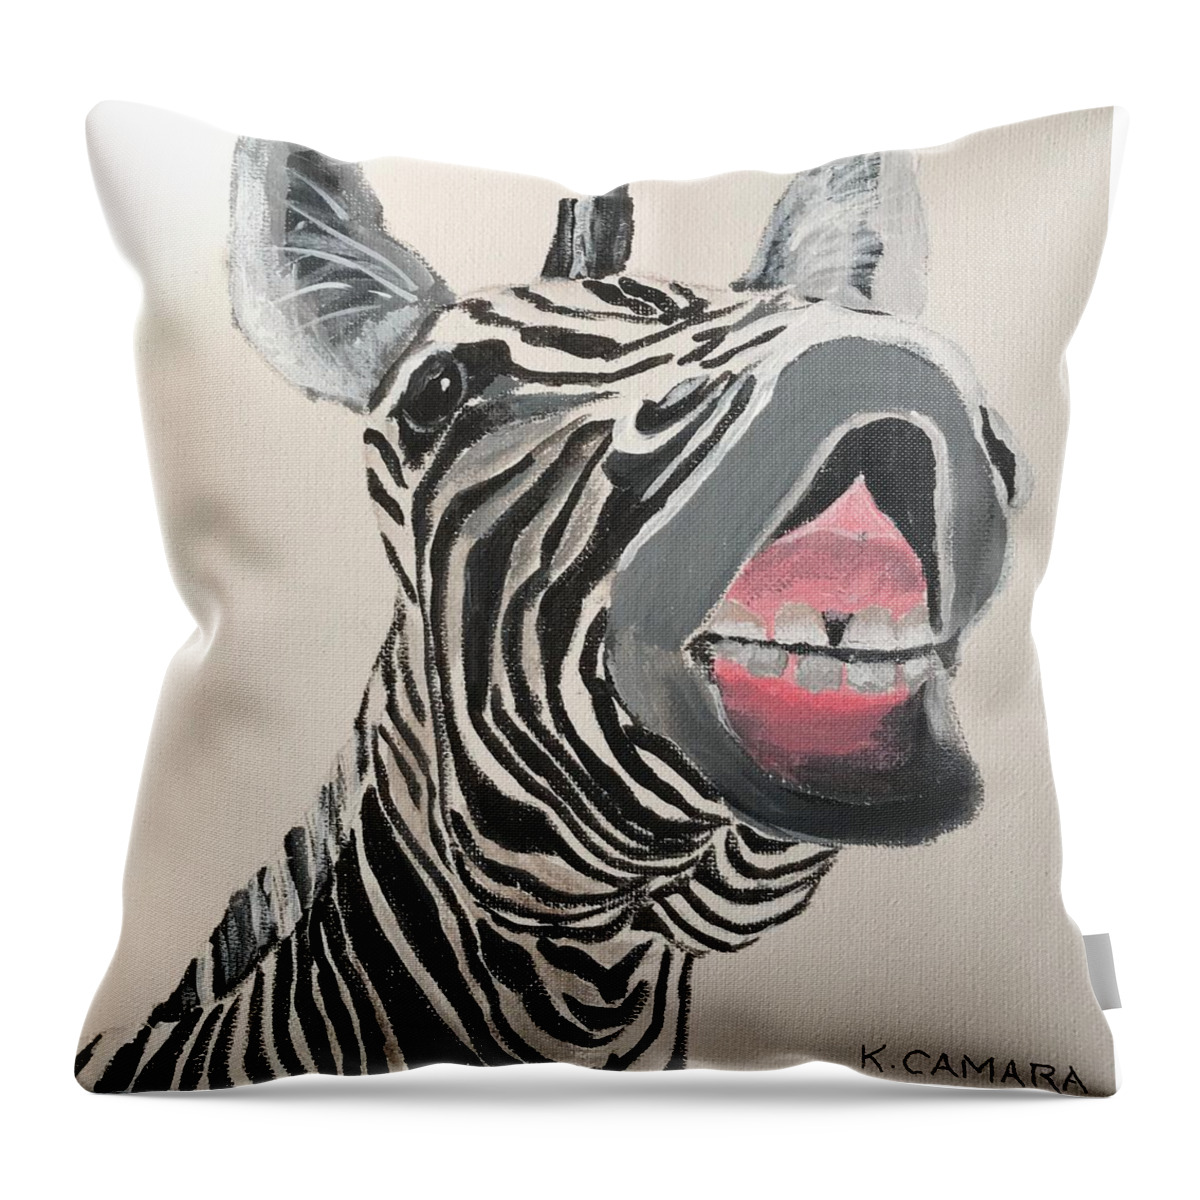 Pets Throw Pillow featuring the painting Ha Ha Zebra by Kathie Camara